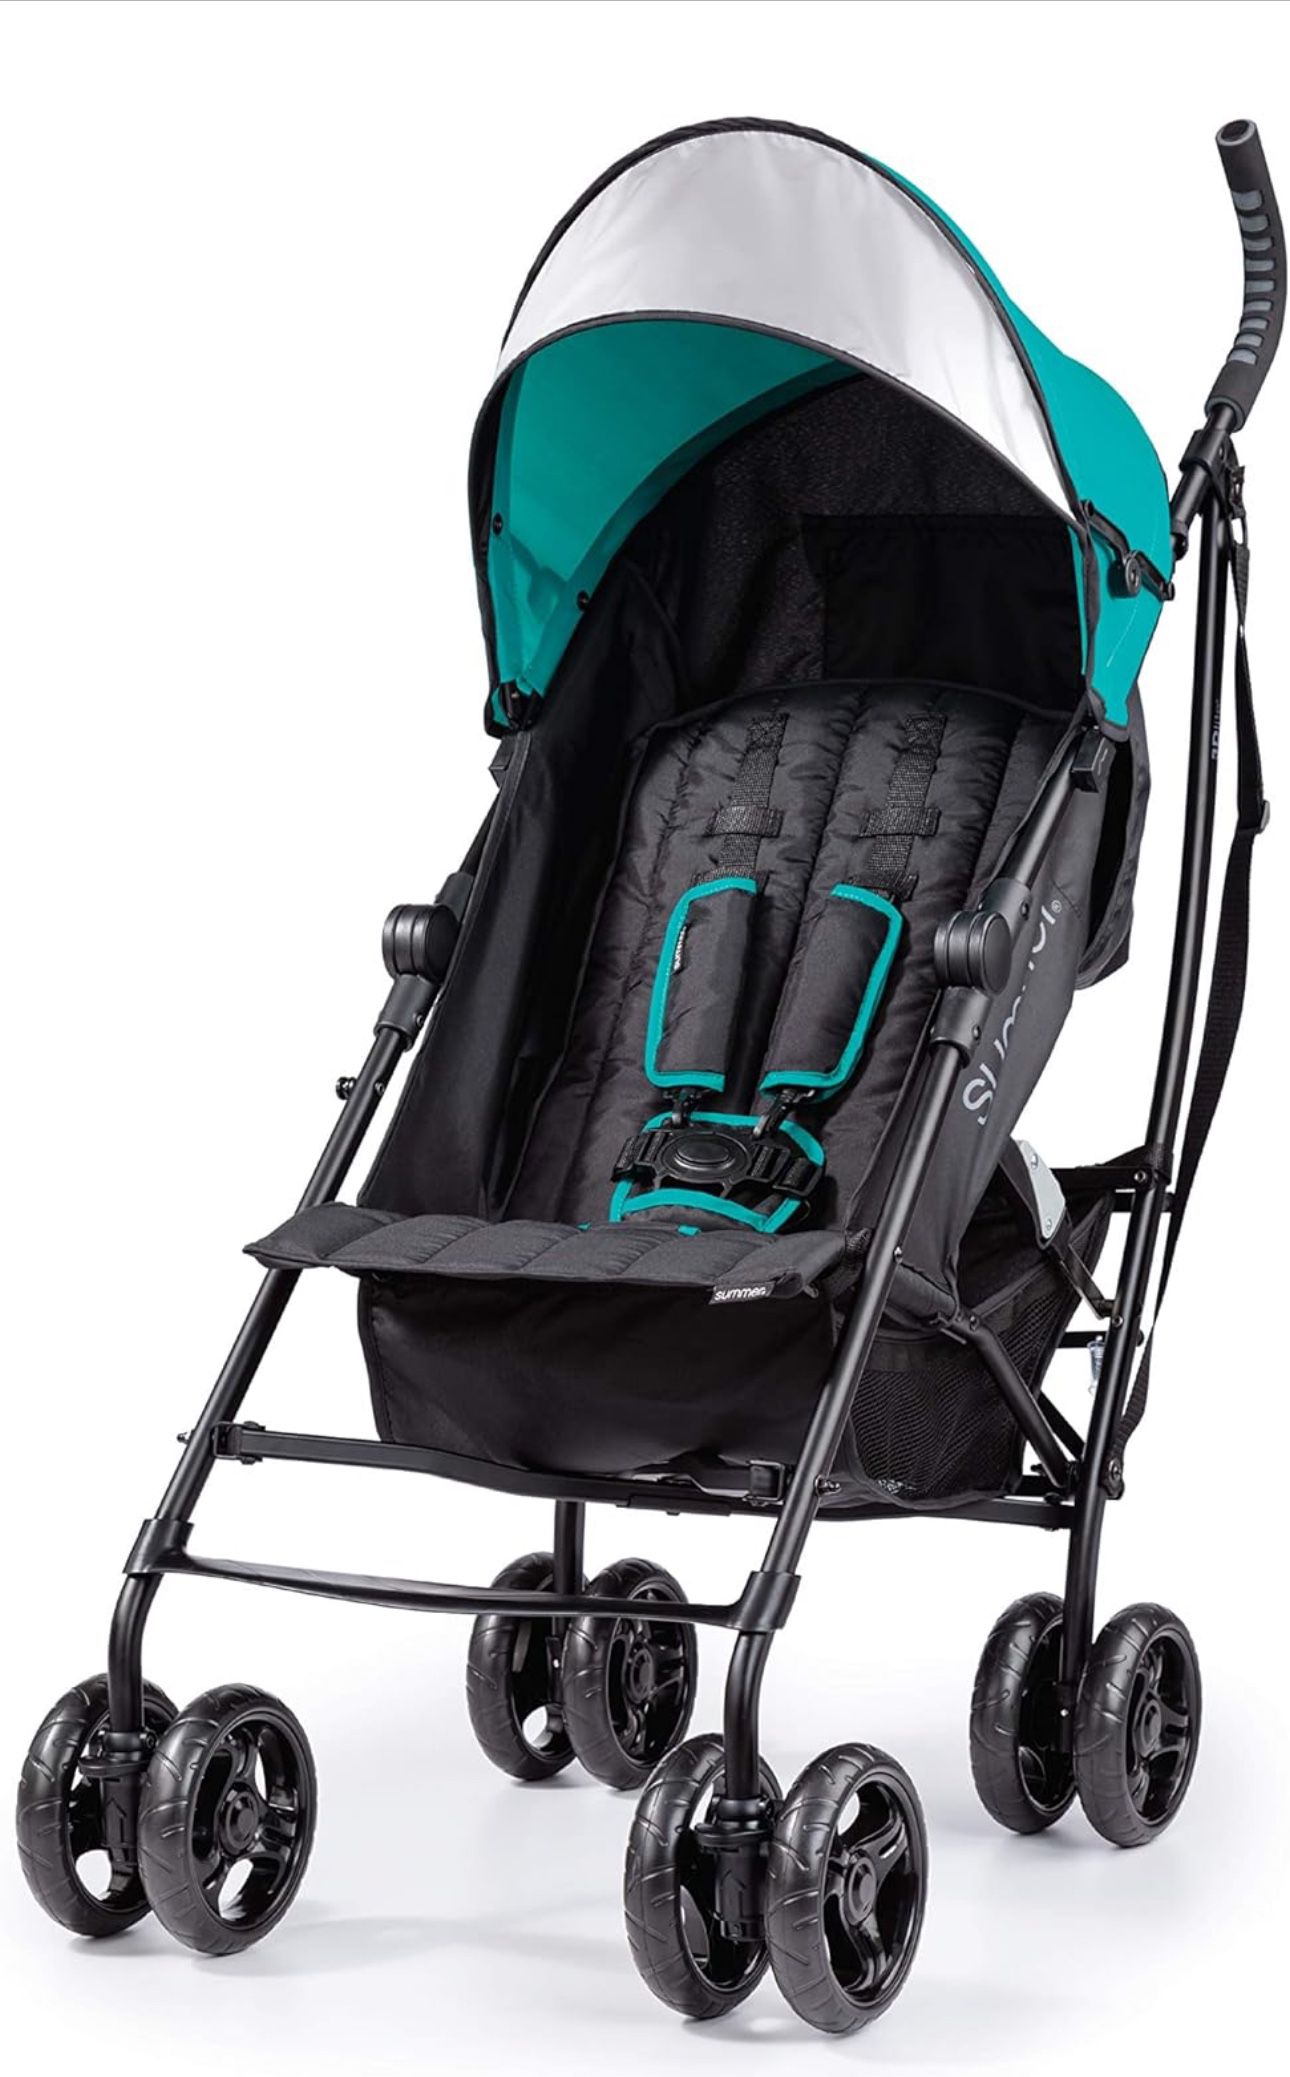 Summer Infant 3Dlite Convenience Stroller, Teal - Lightweight Stroller with Aluminum Frame, Large Seat Area, 4 Position Recline, Extra Large Storage B